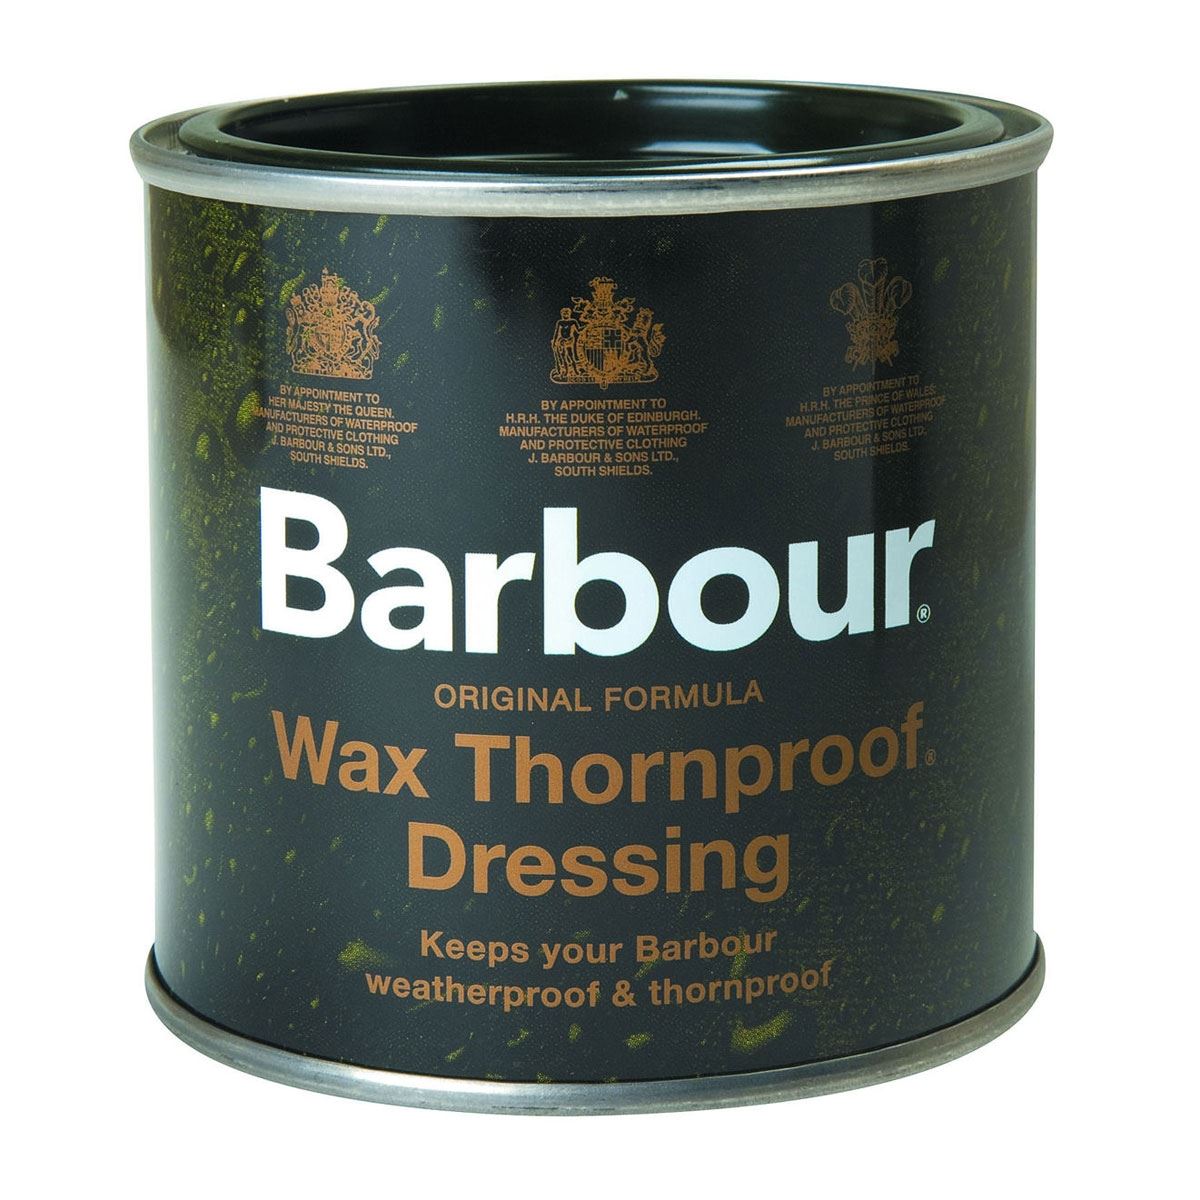 What ingredients are in the Barbour Wax Thornproof Dressing?